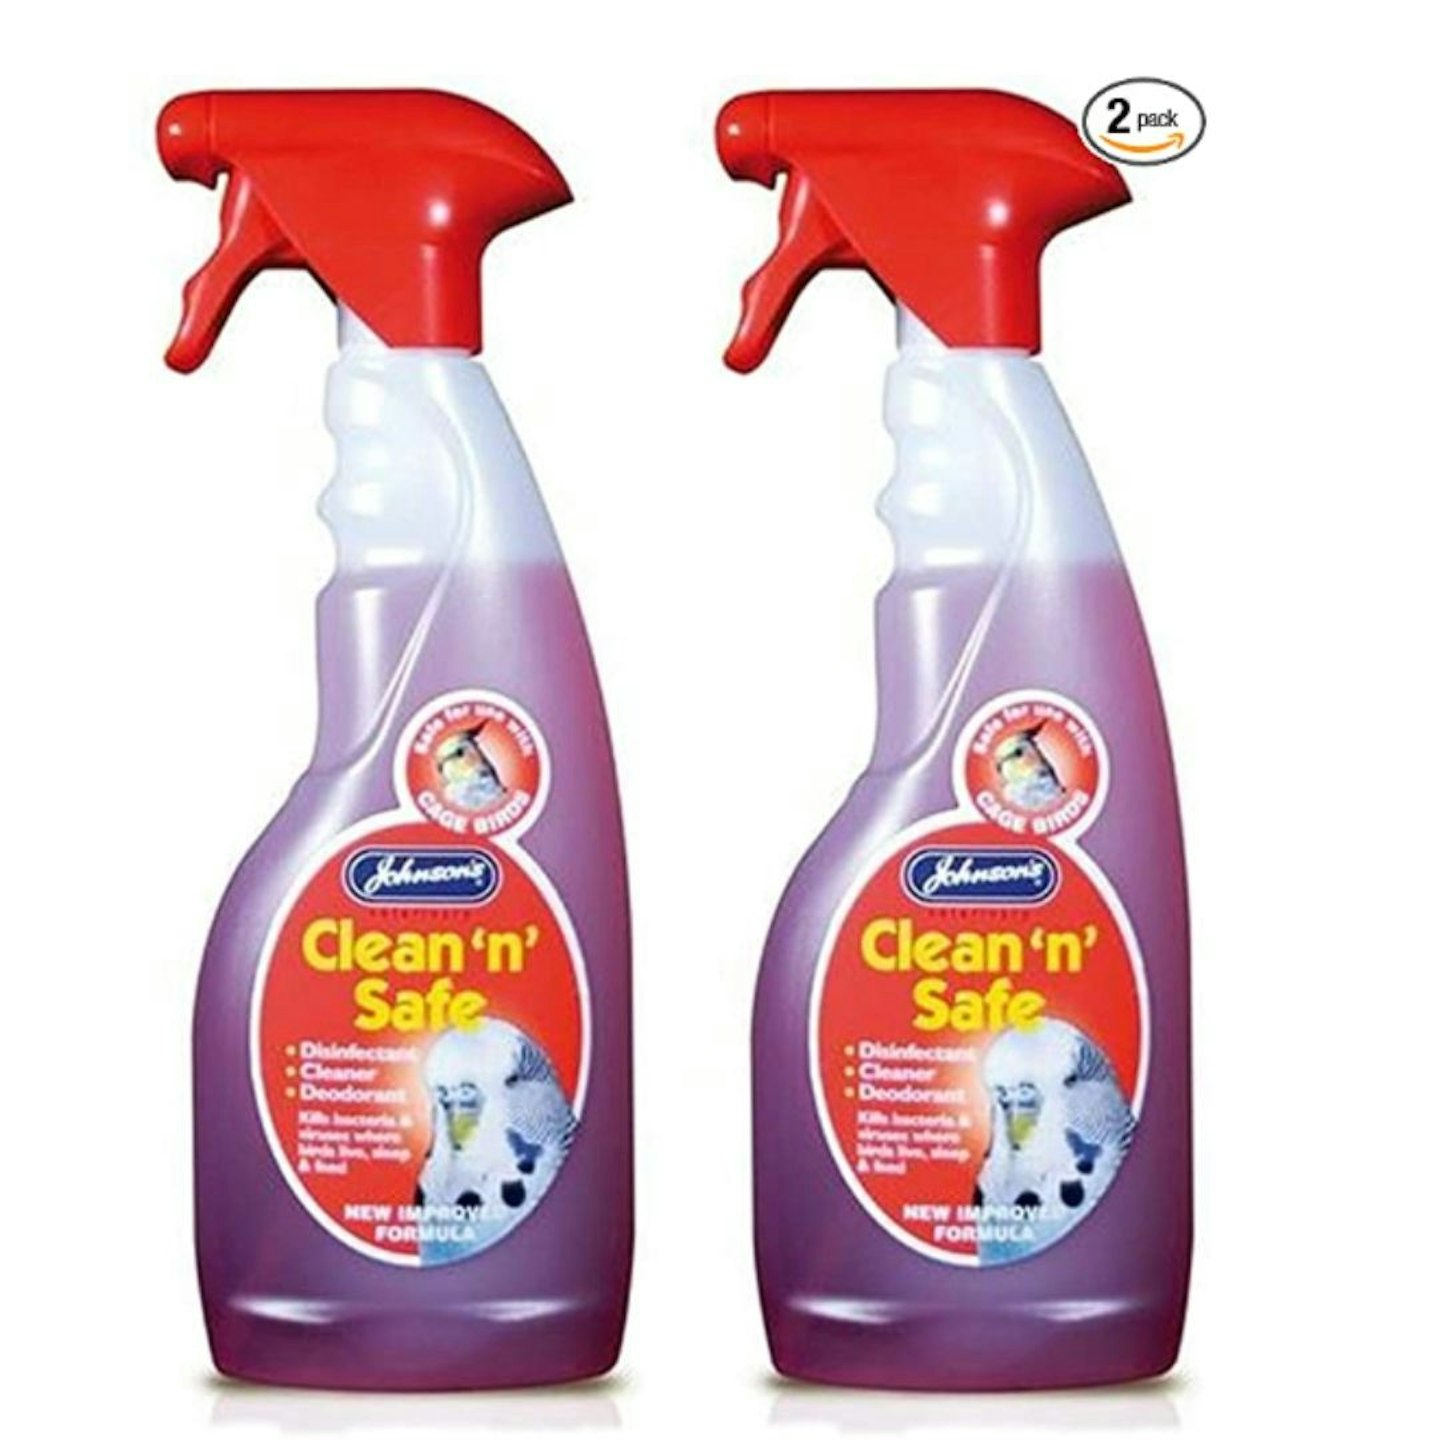 Johnsons vet Clean 'n' Safe Pet Disinfectant for Bird Cage Two Pack